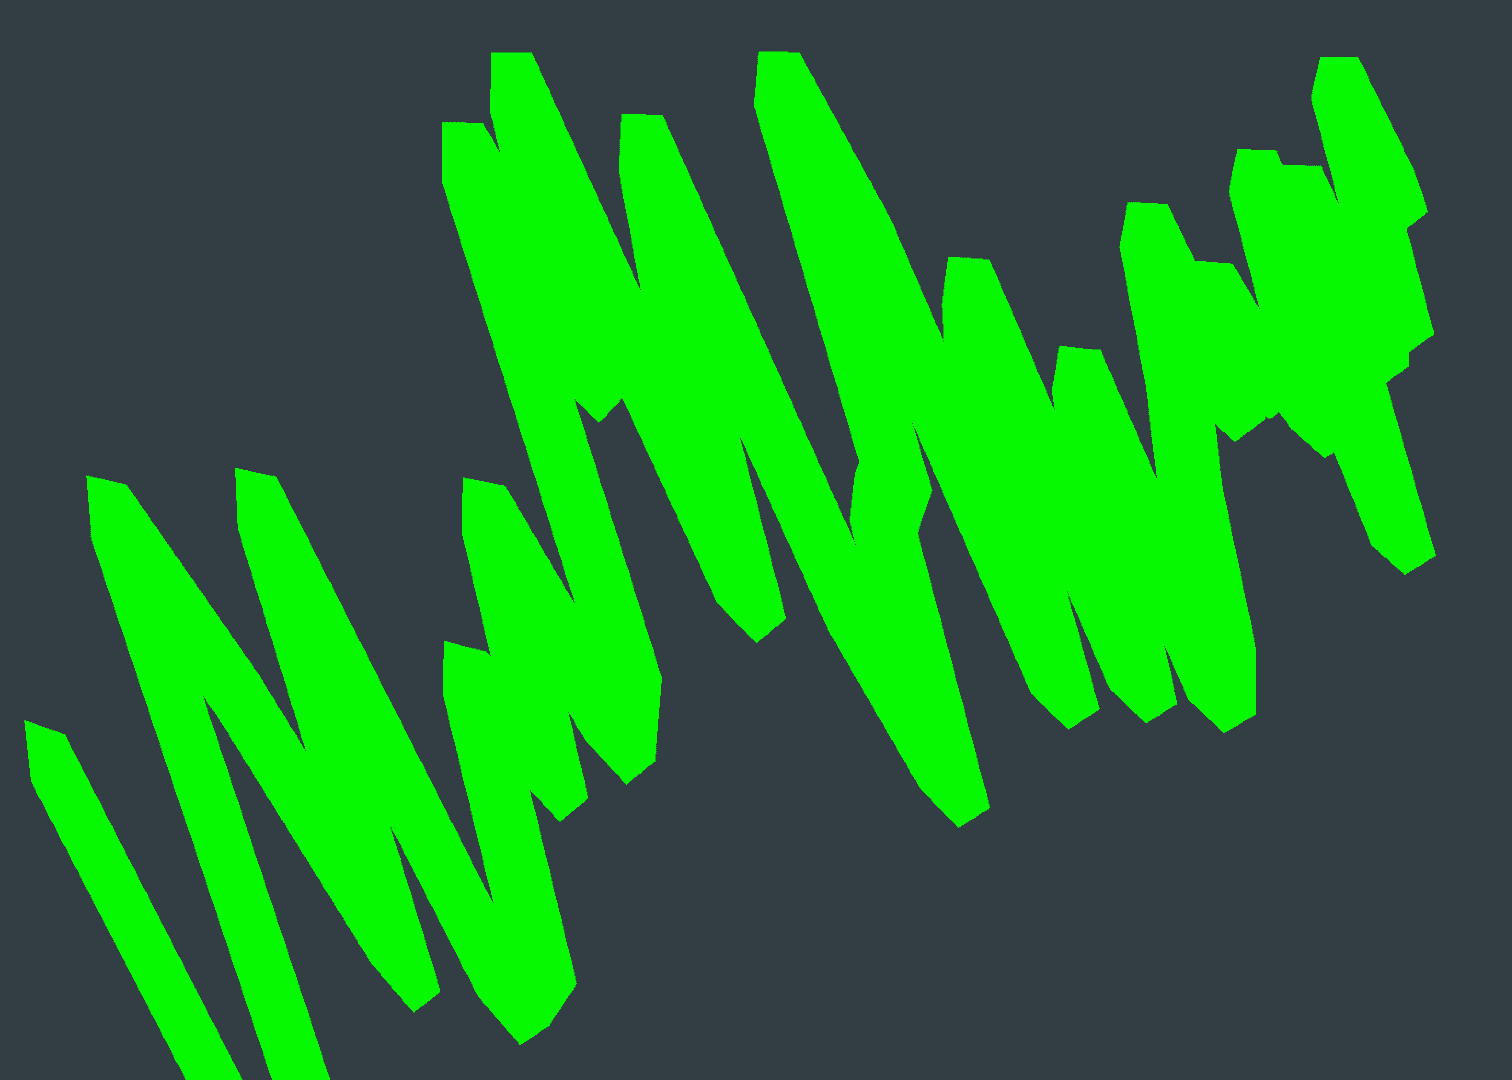 A 3D oscilloscope visualization depicting an audio waveform as a green pipe mesh.